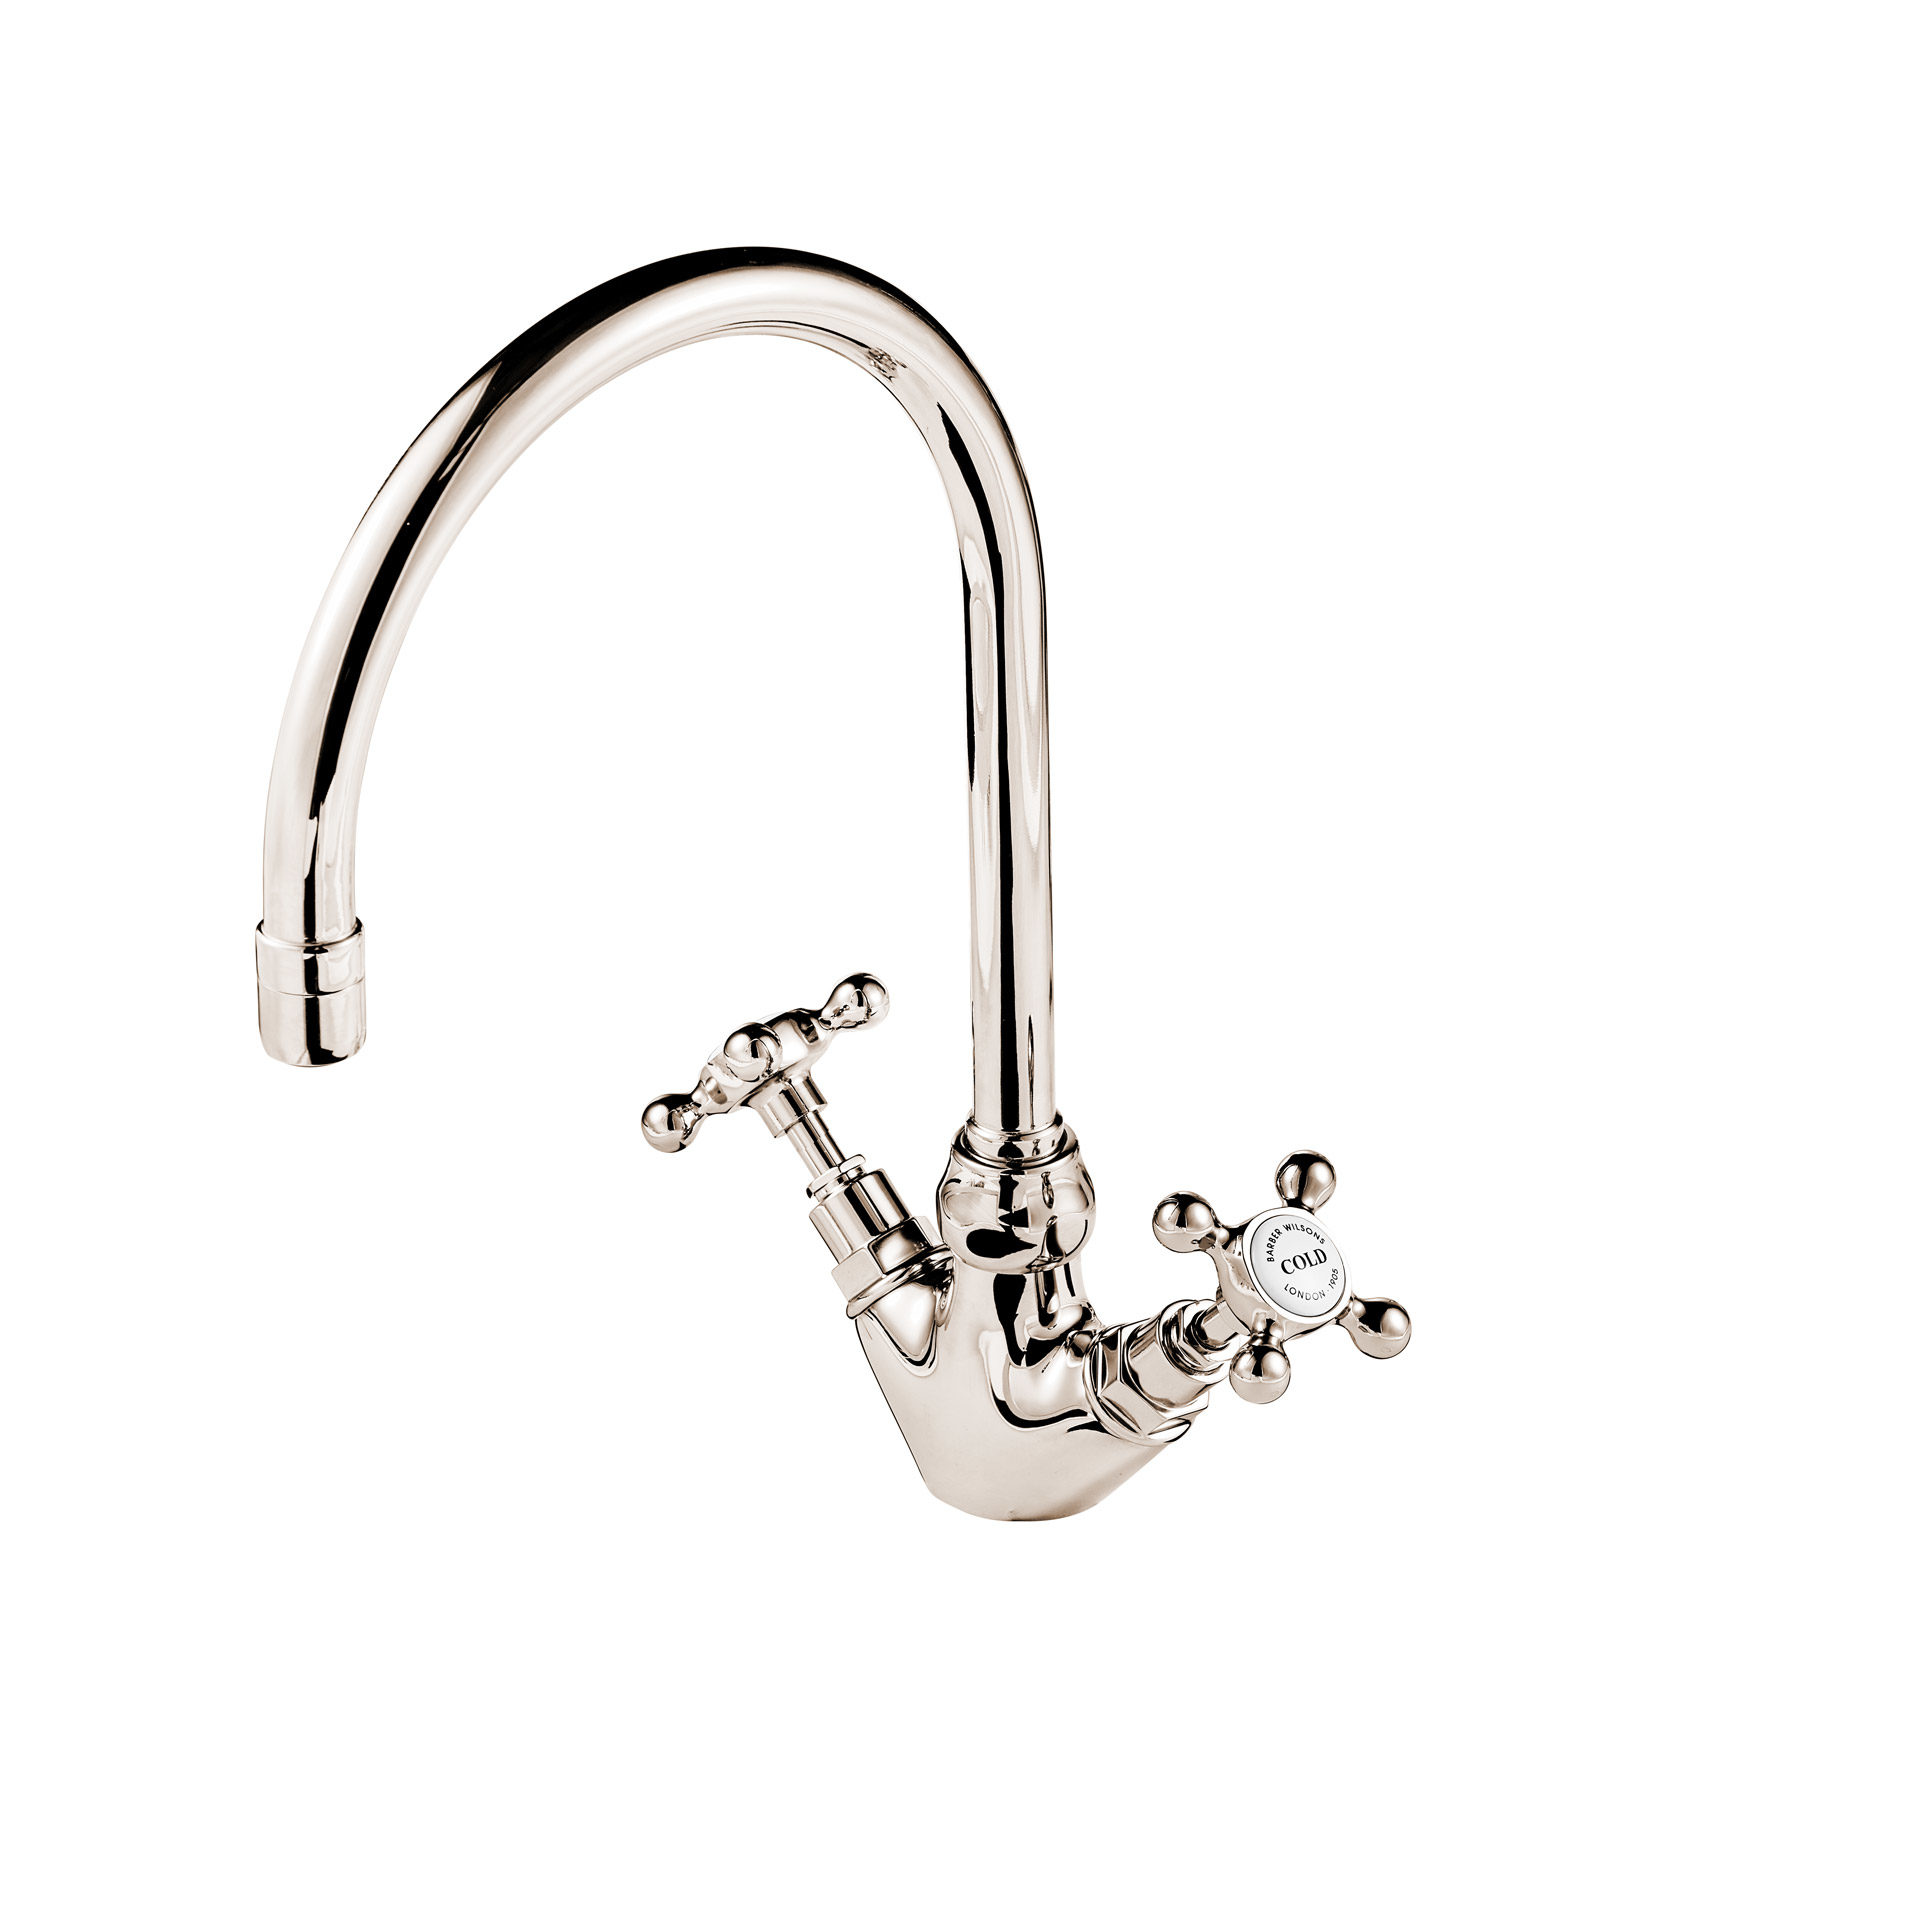 Single hole deck mounted kitchen tap mixer with a swivel spout swan neck